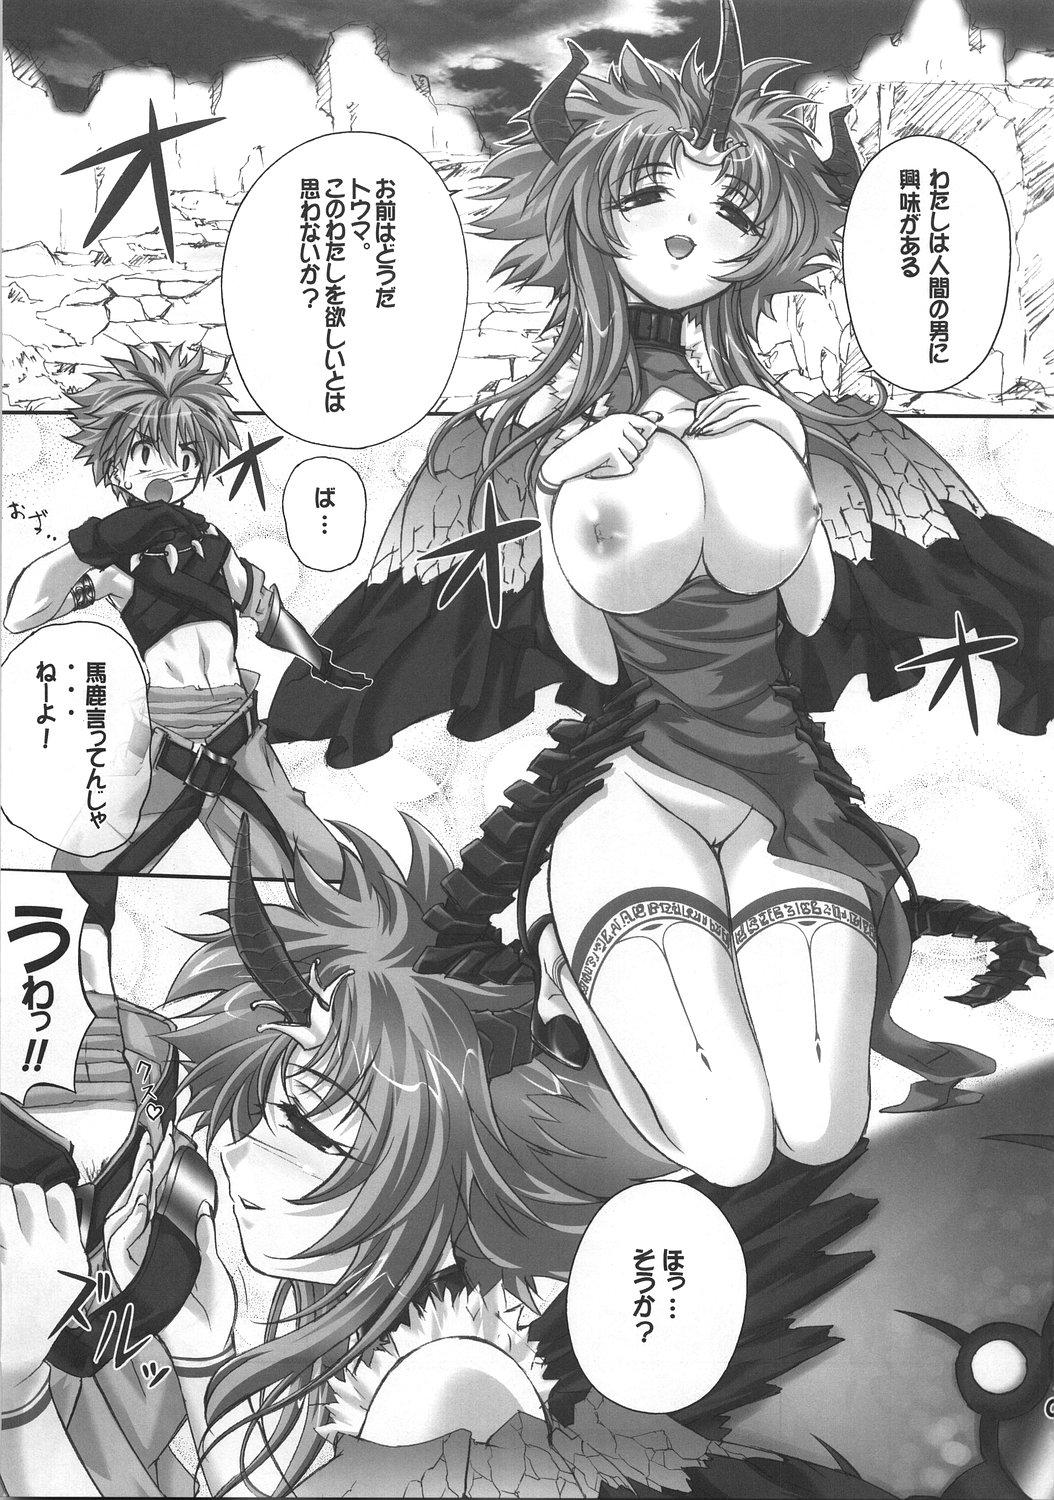 Asses Cyriltte Level Janee zo! - Shining force exa Natural - Page 4